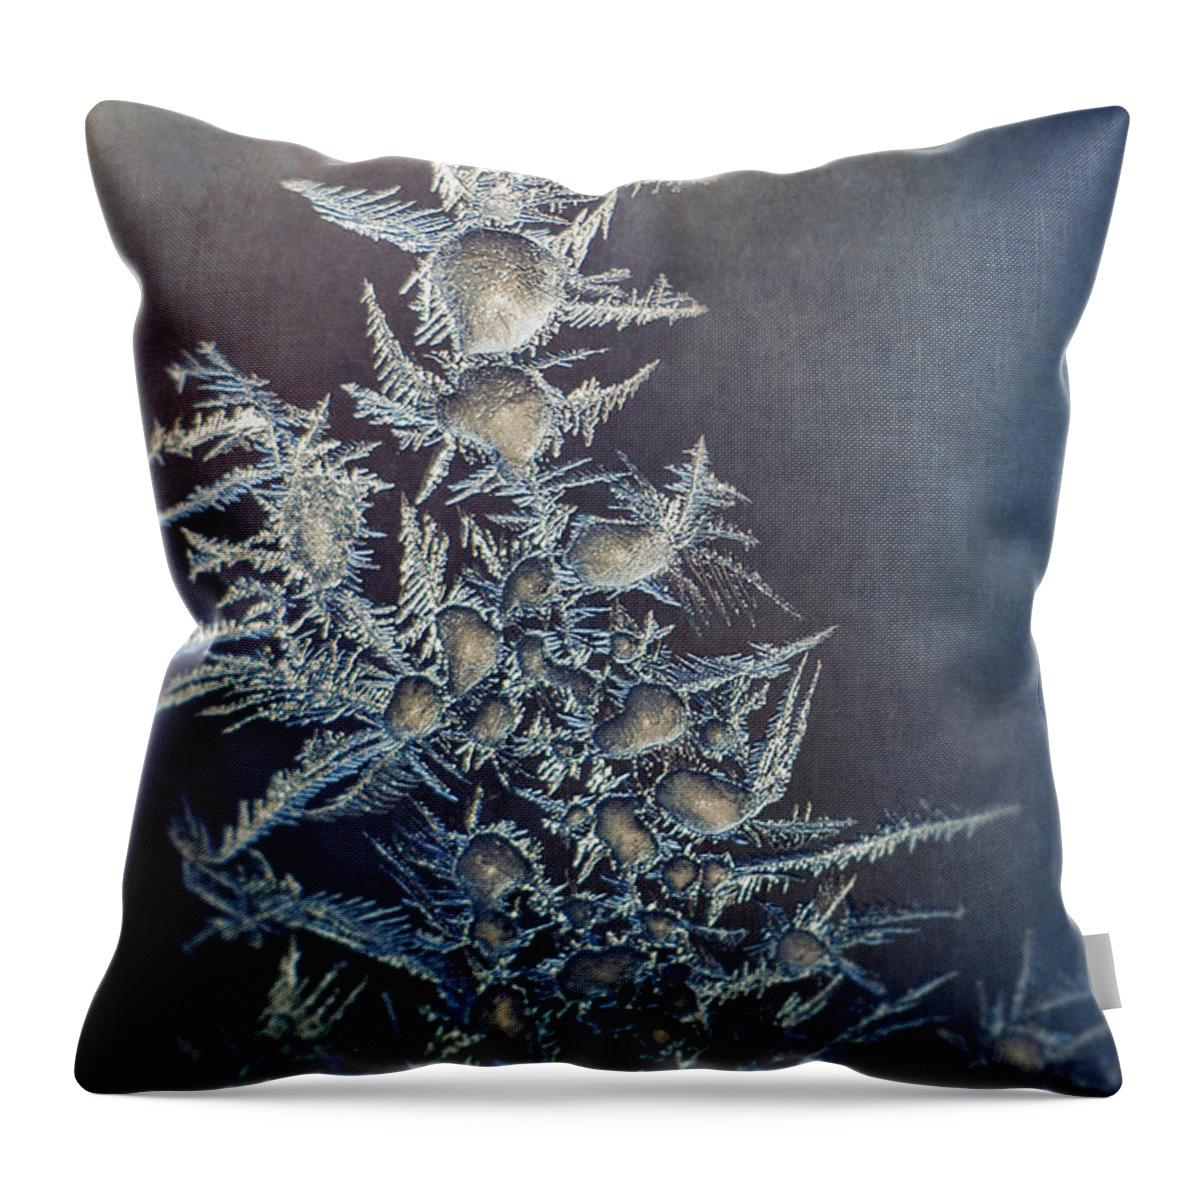 Frozen Throw Pillow featuring the photograph Frost by Scott Norris